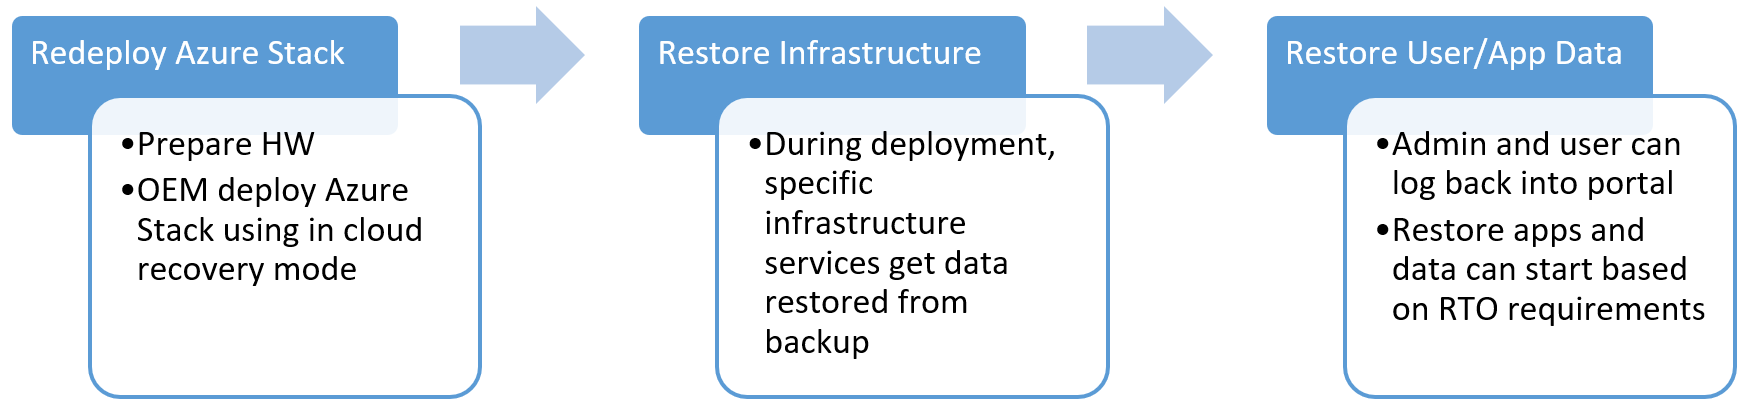 Azure Stack Hub data recovery workflow - Redeployment